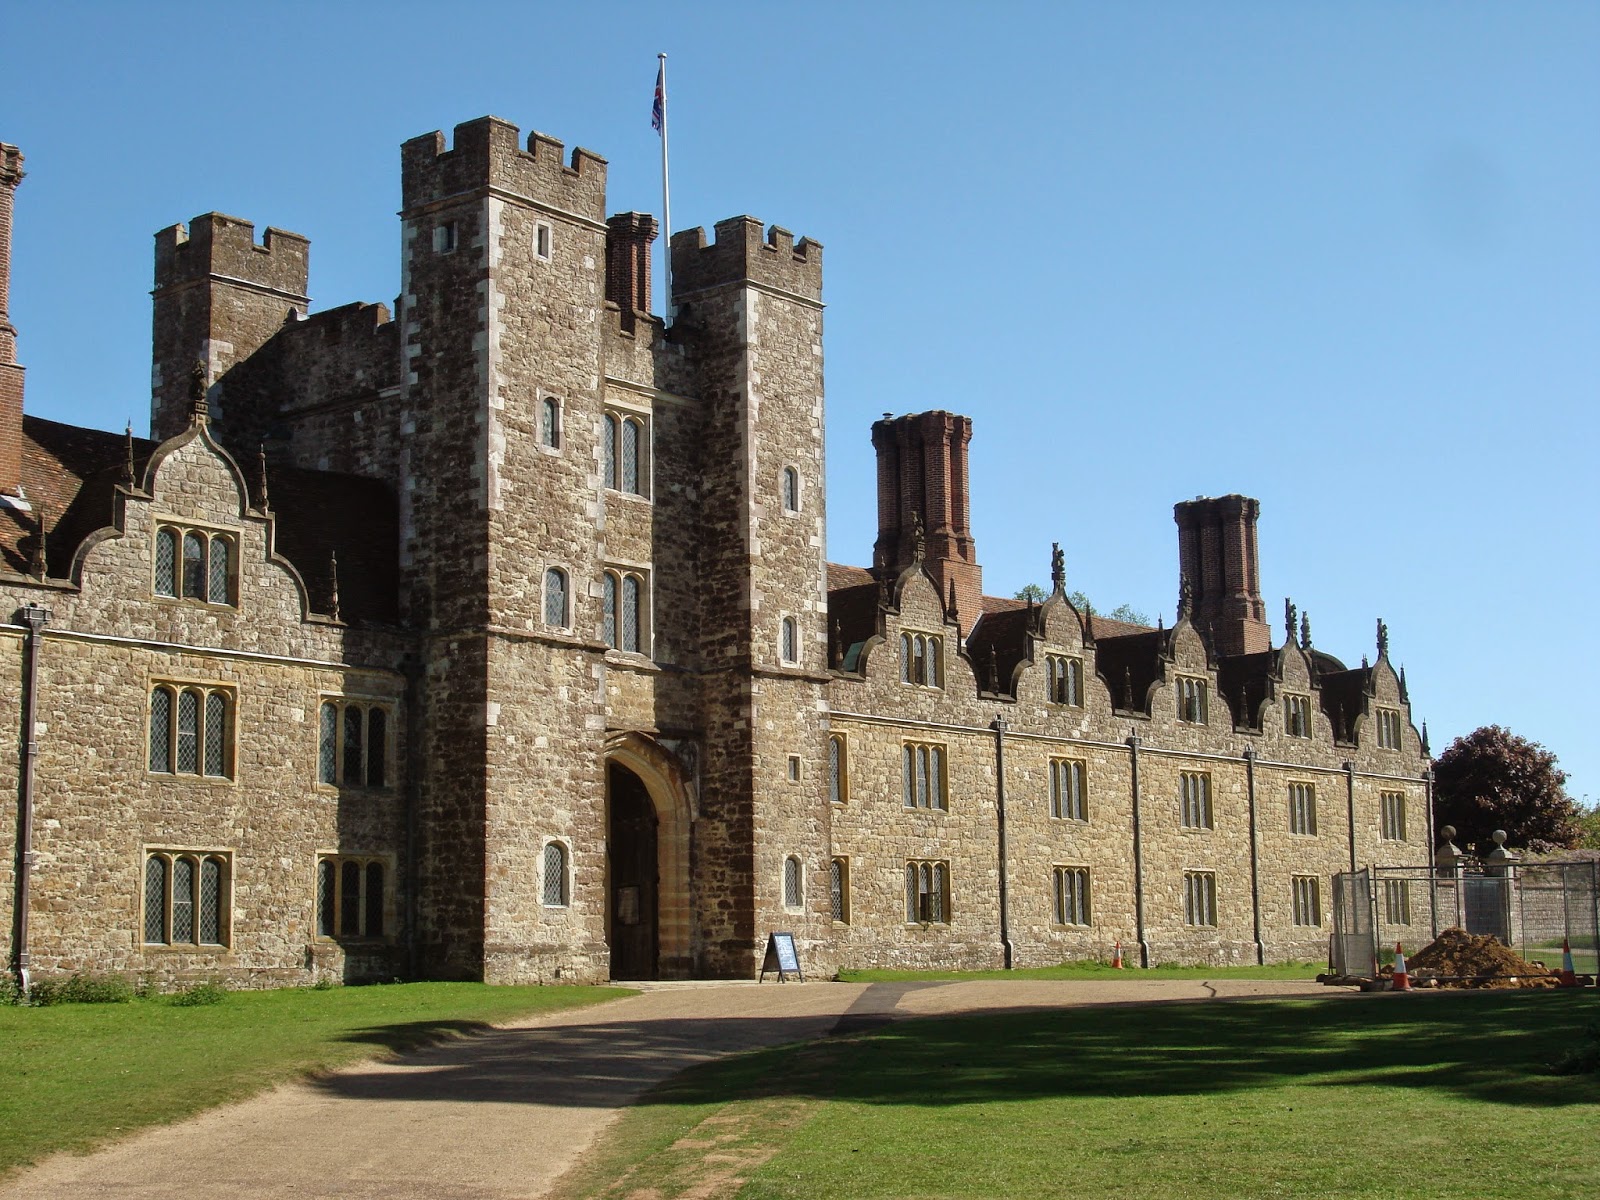 Knole House, the Sackville family seat